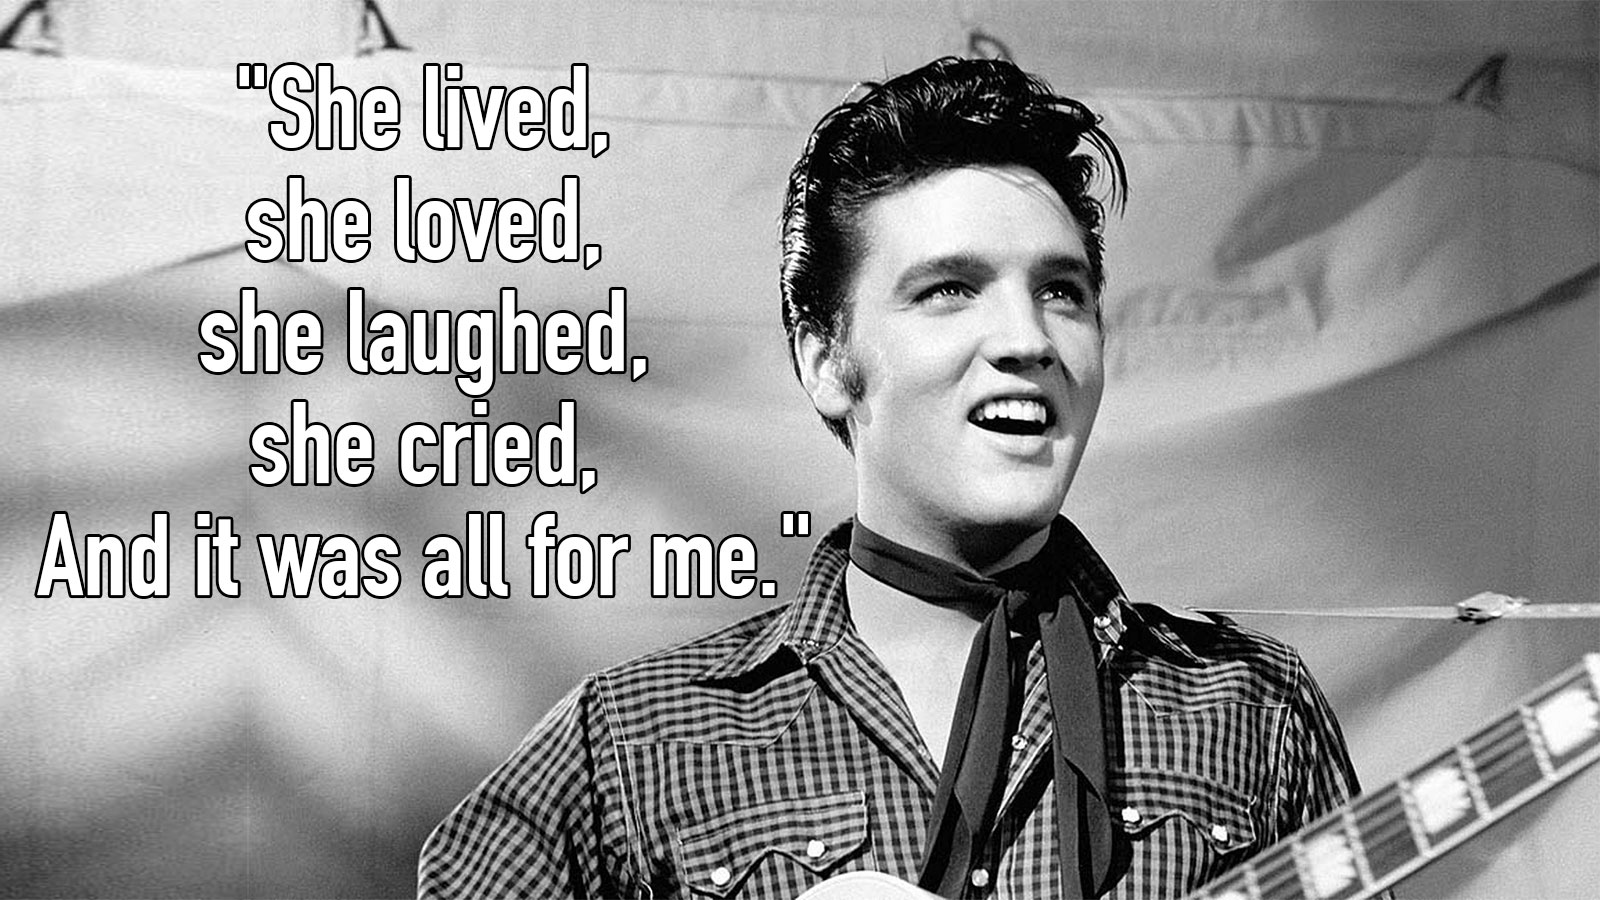 Can You Guess Which Elvis Presley Song This Lyric Is From? 91